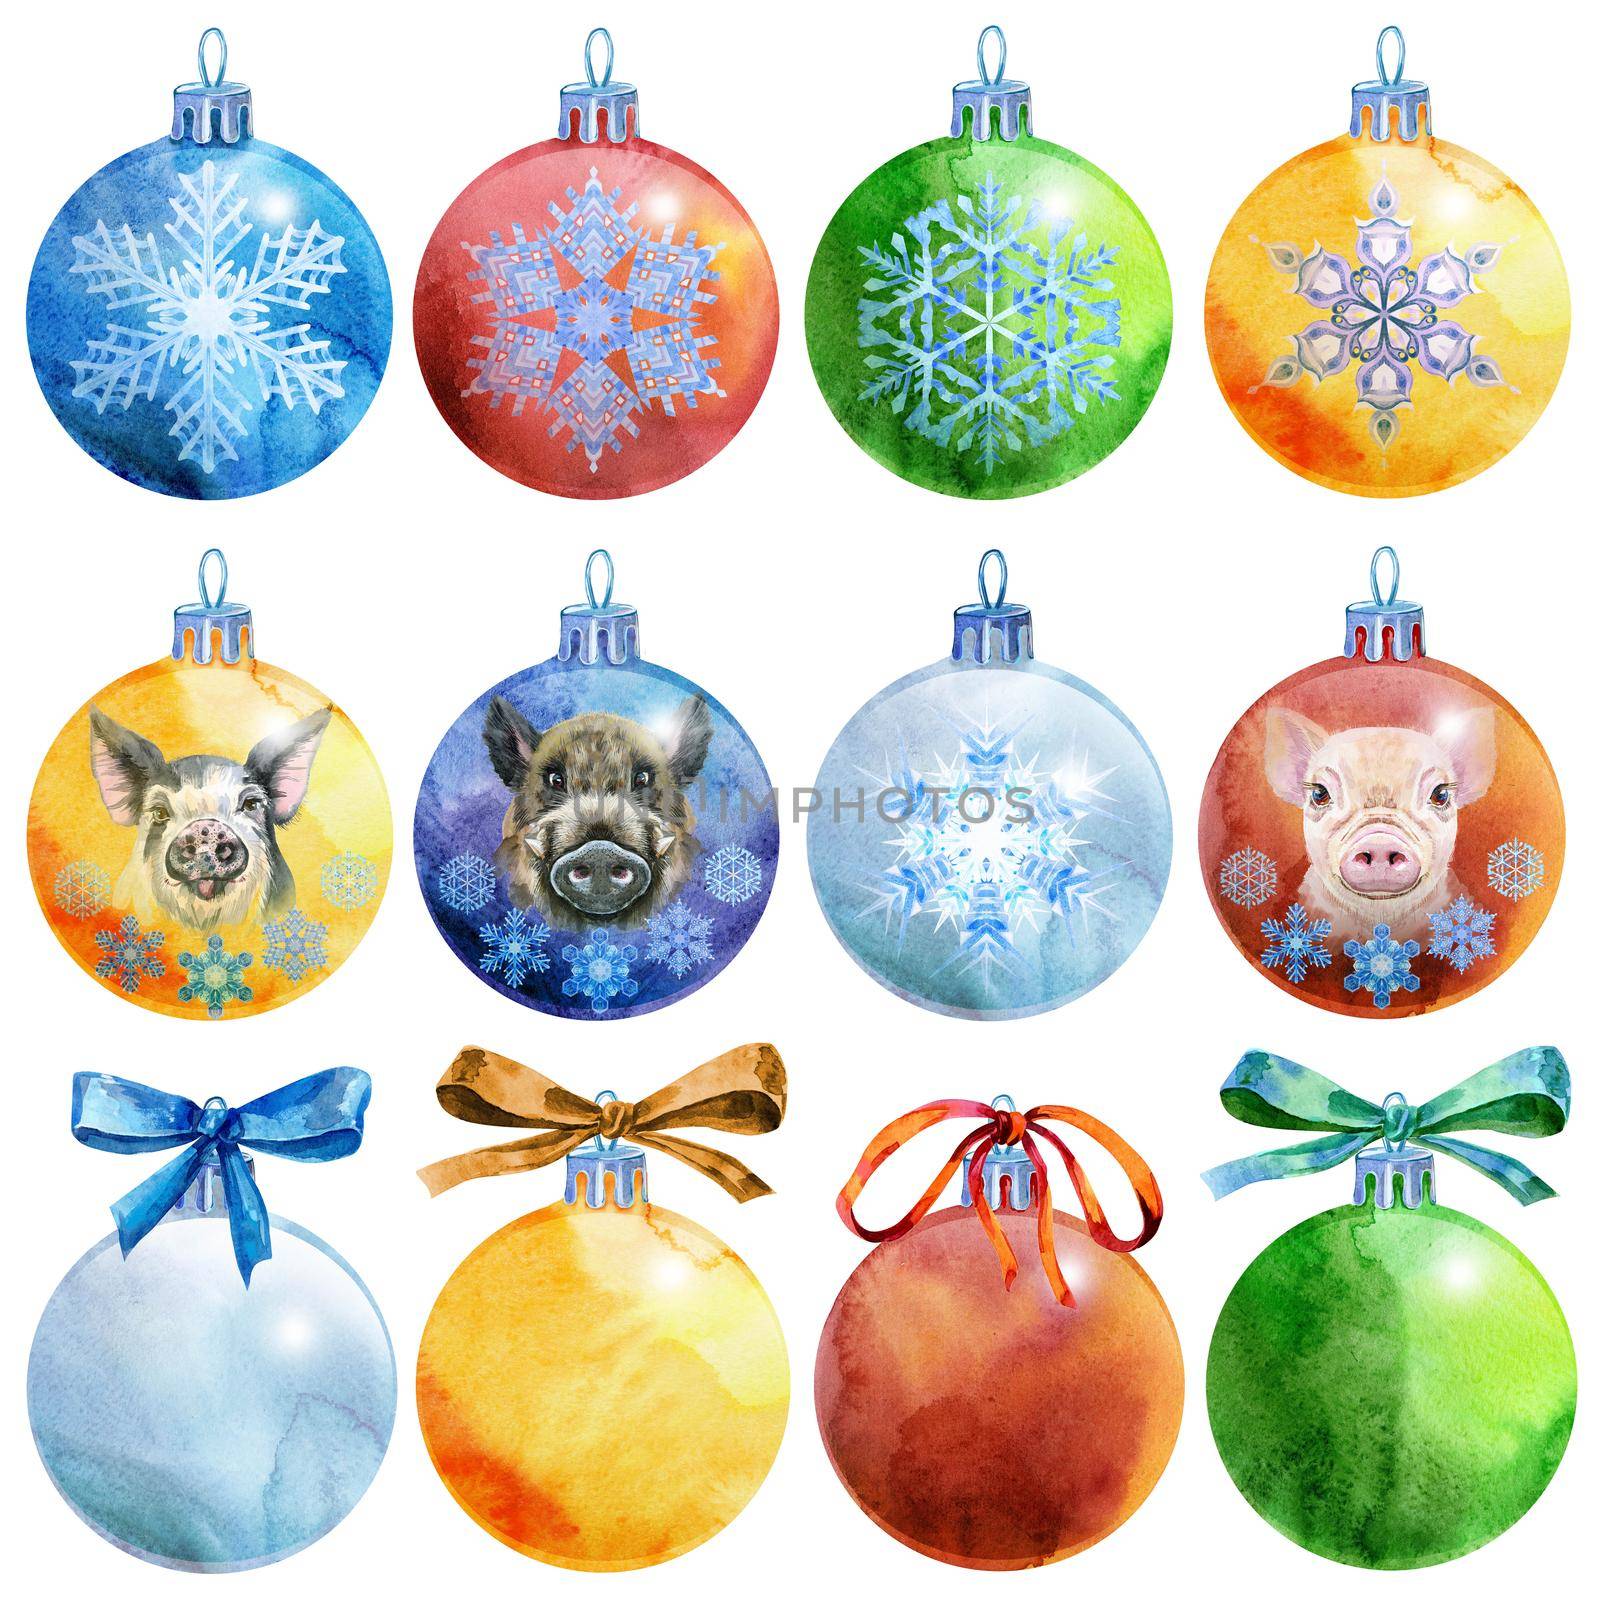 Set of Watercolor Christmas tree ball with image of pig and snowflakes. Card for your creativity